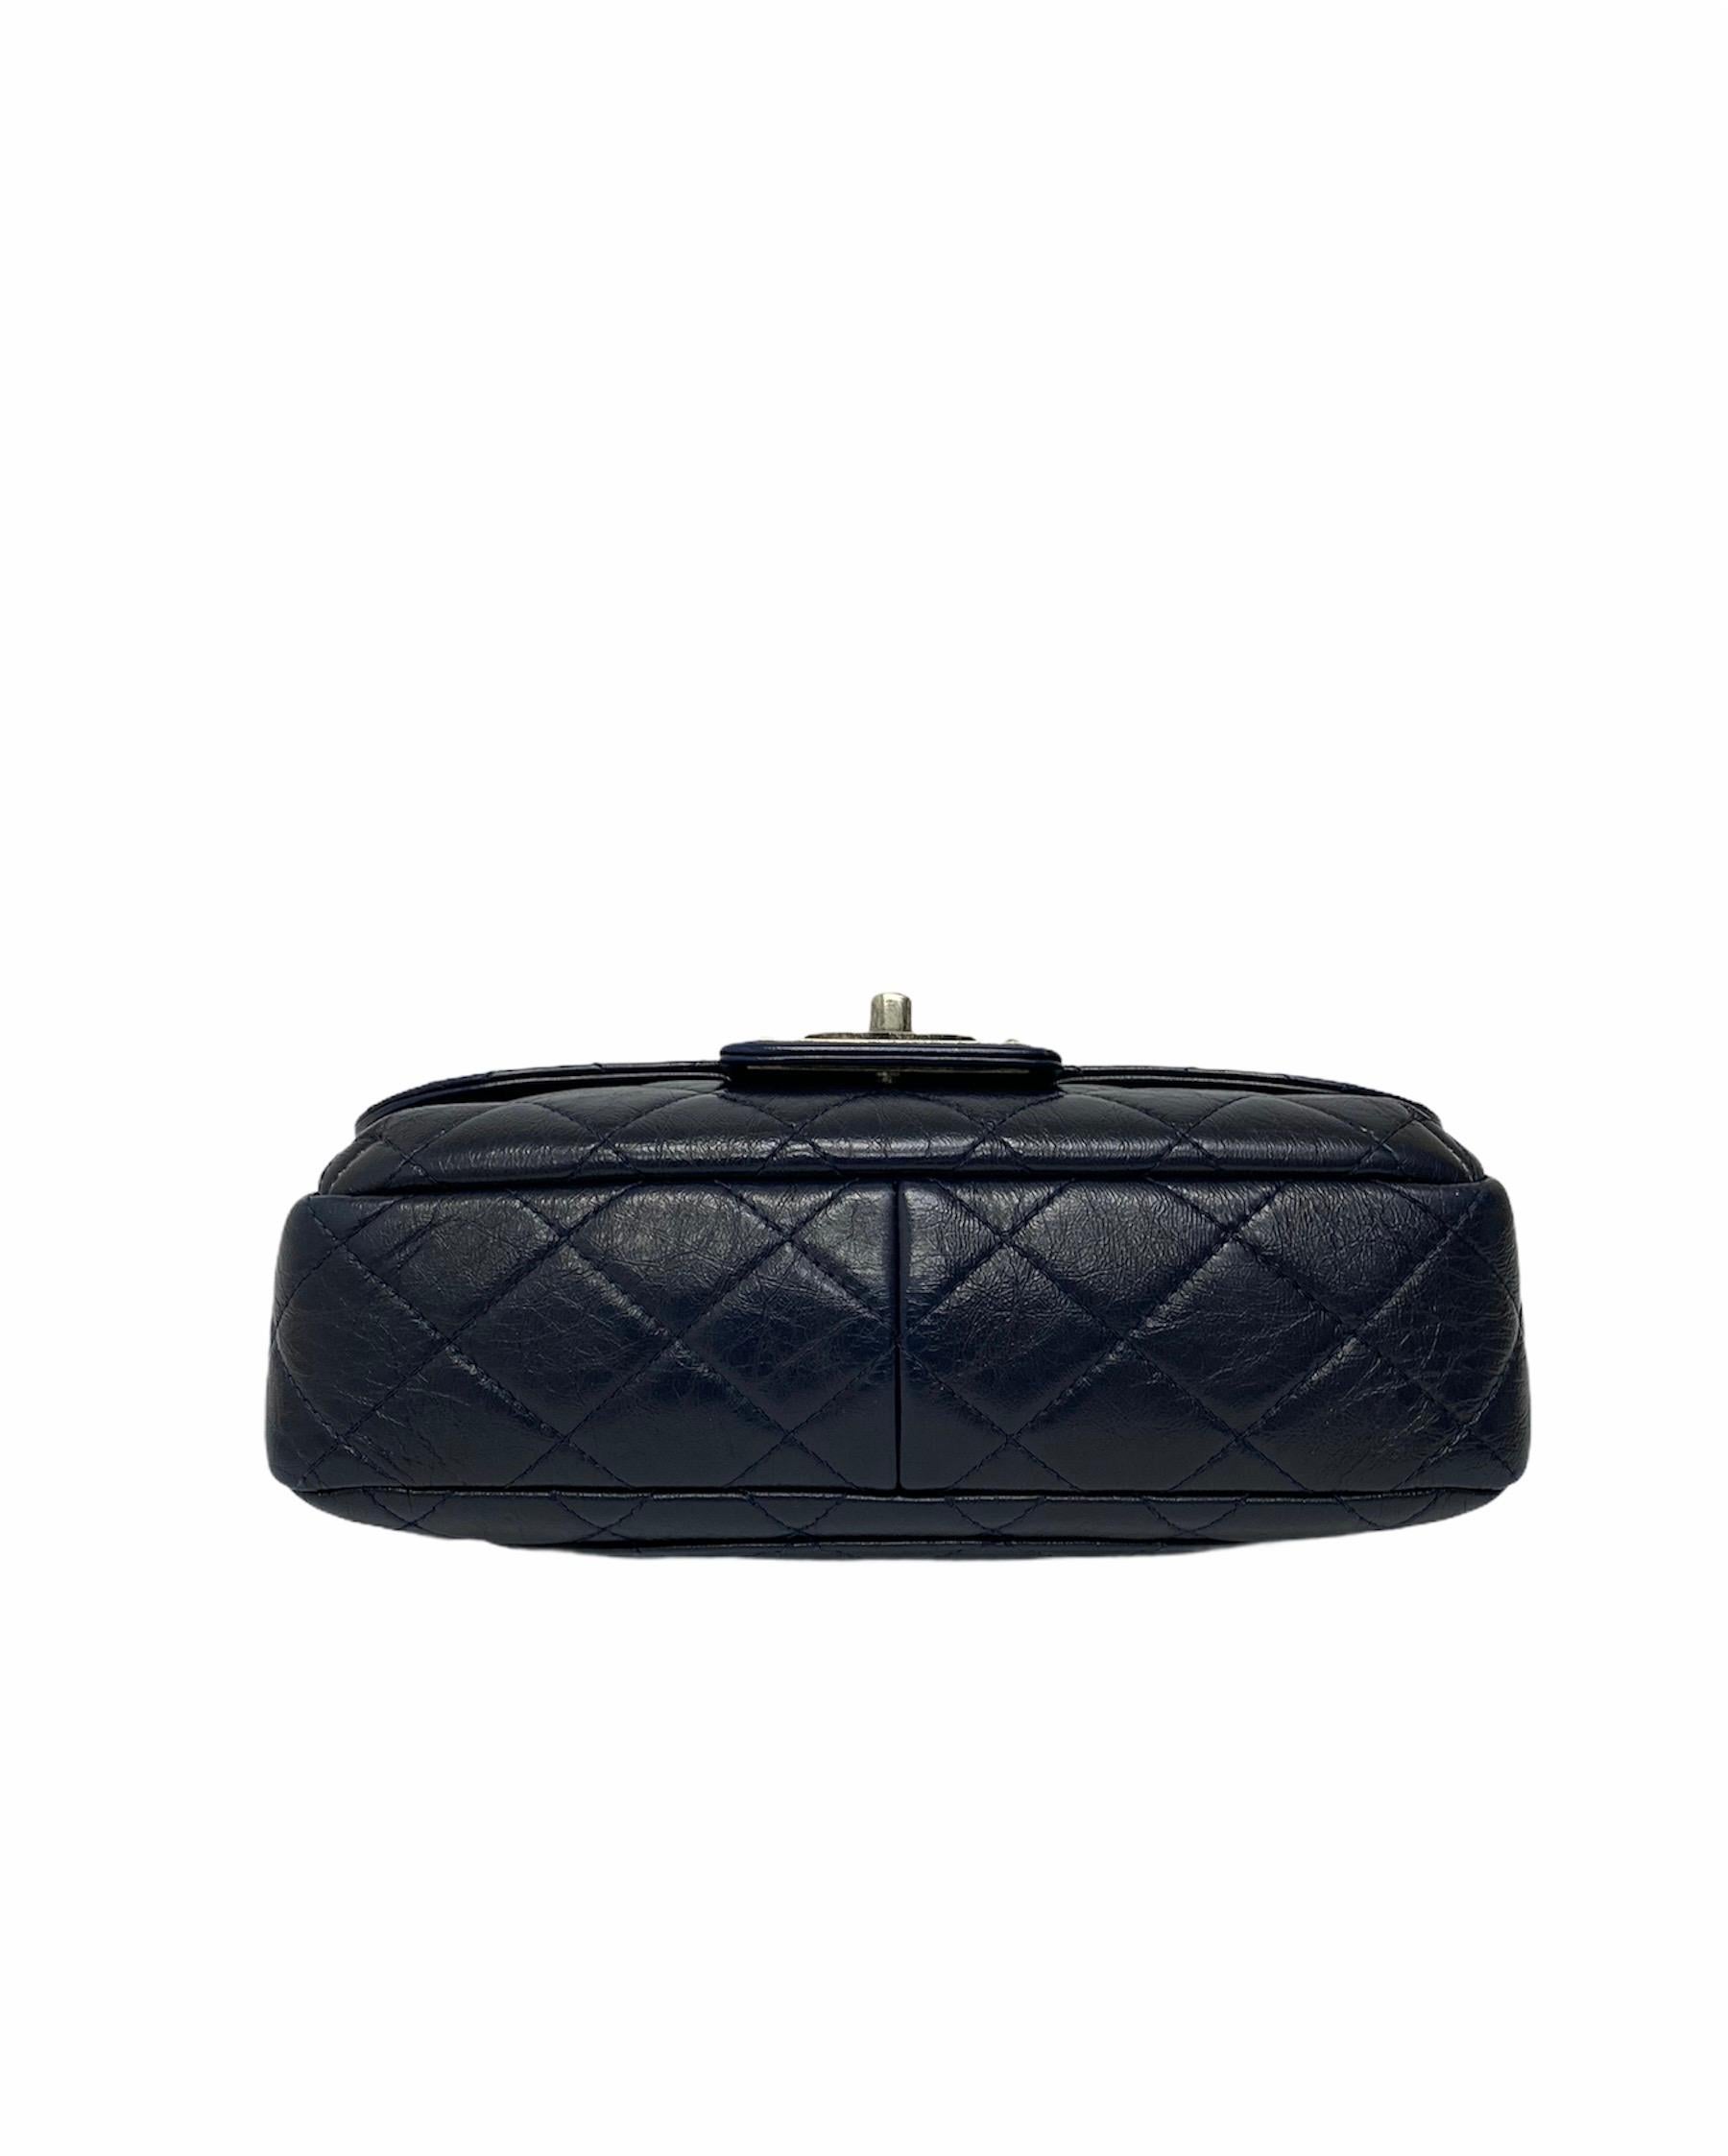 Women's Chanel Blue Bag in Leather with Silver Hardware